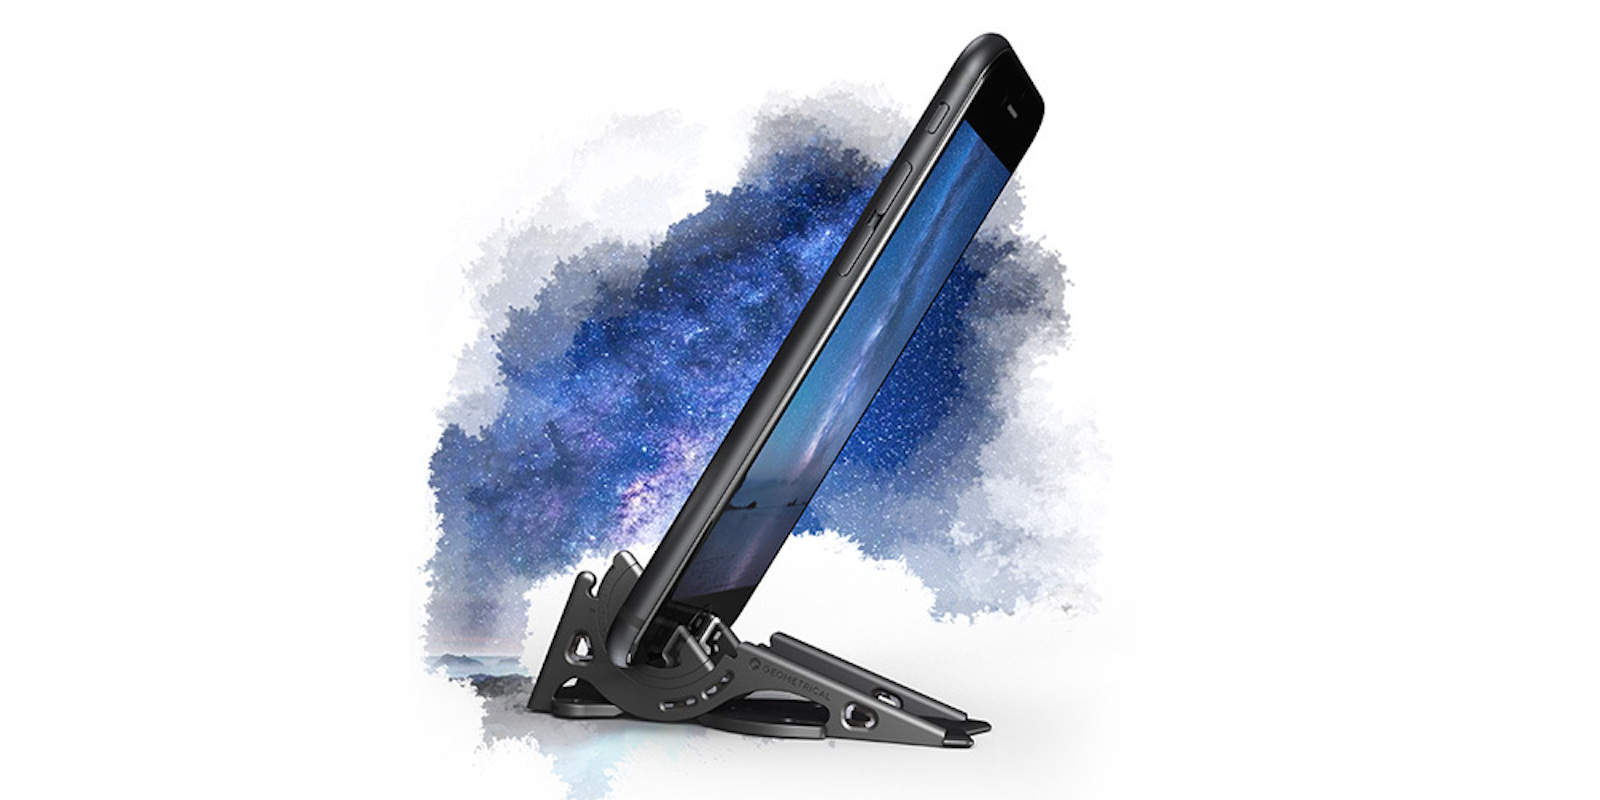 This tripod is solid, versatile, and folds up to the size of a credit card.